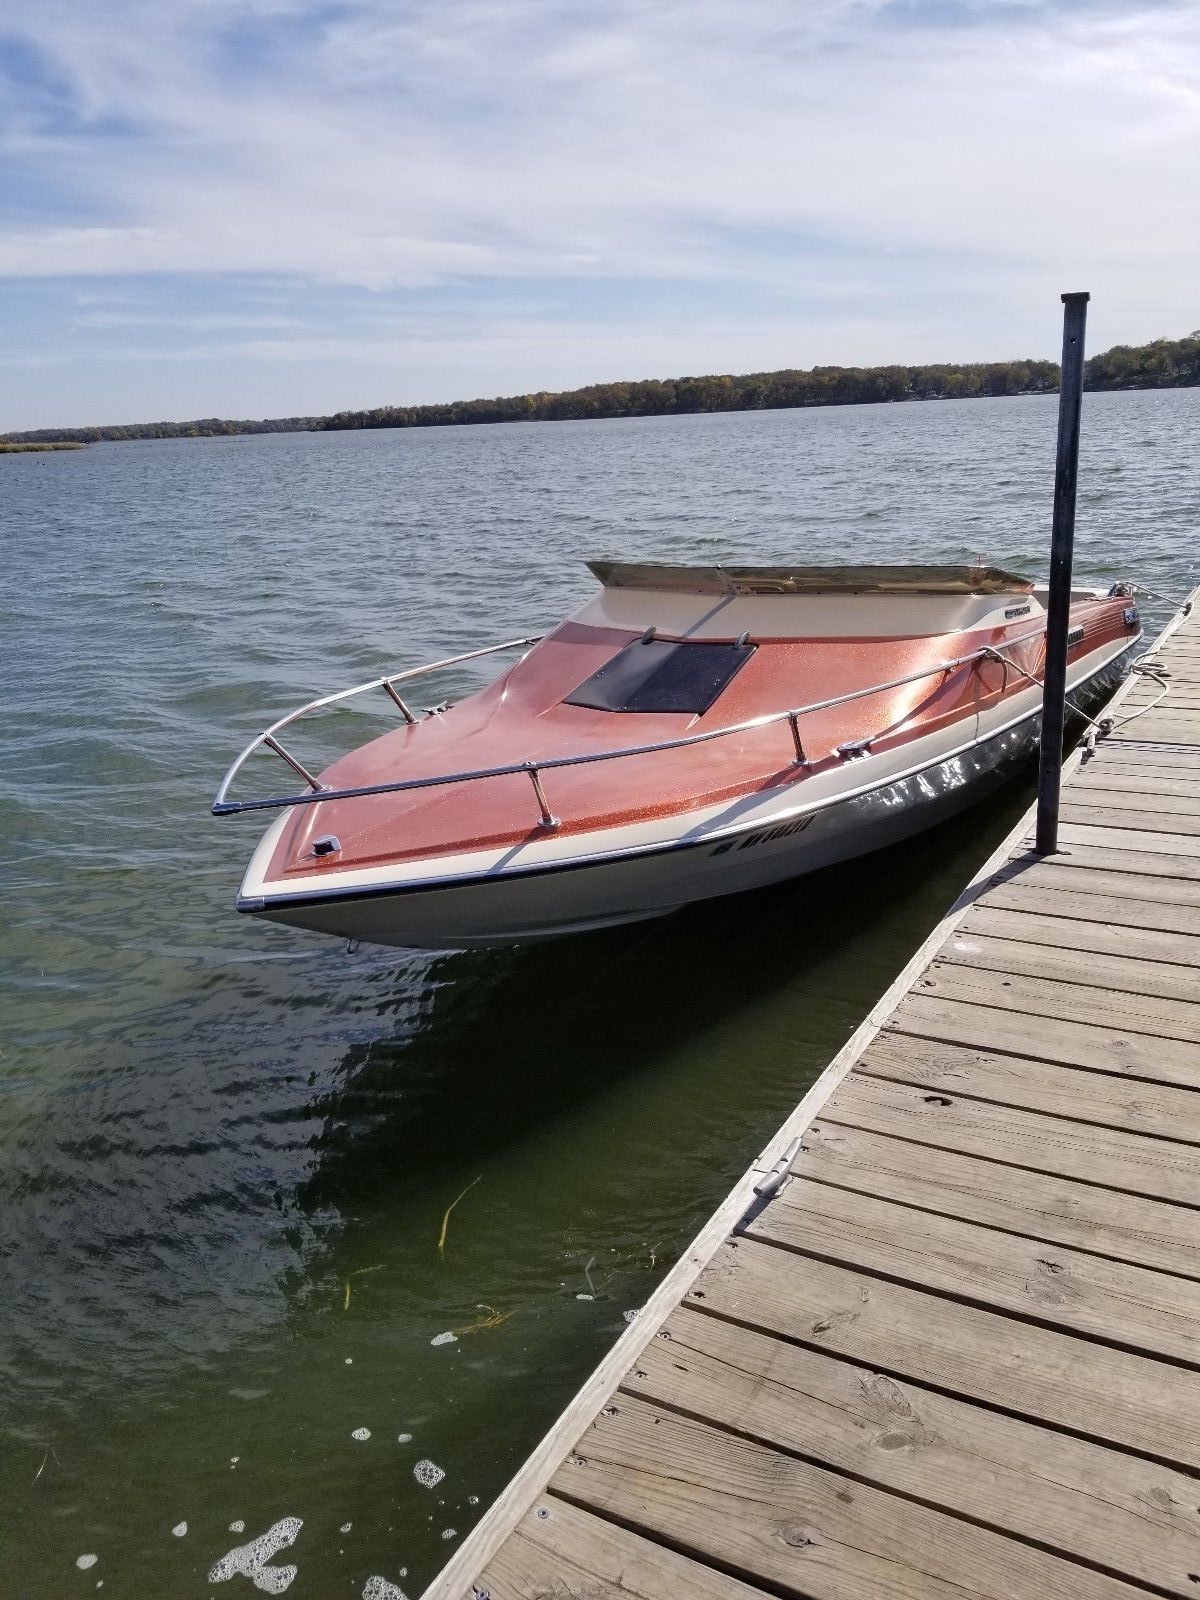 Glastron CV23 1976 for sale for $100 - Boats-from-USA.com